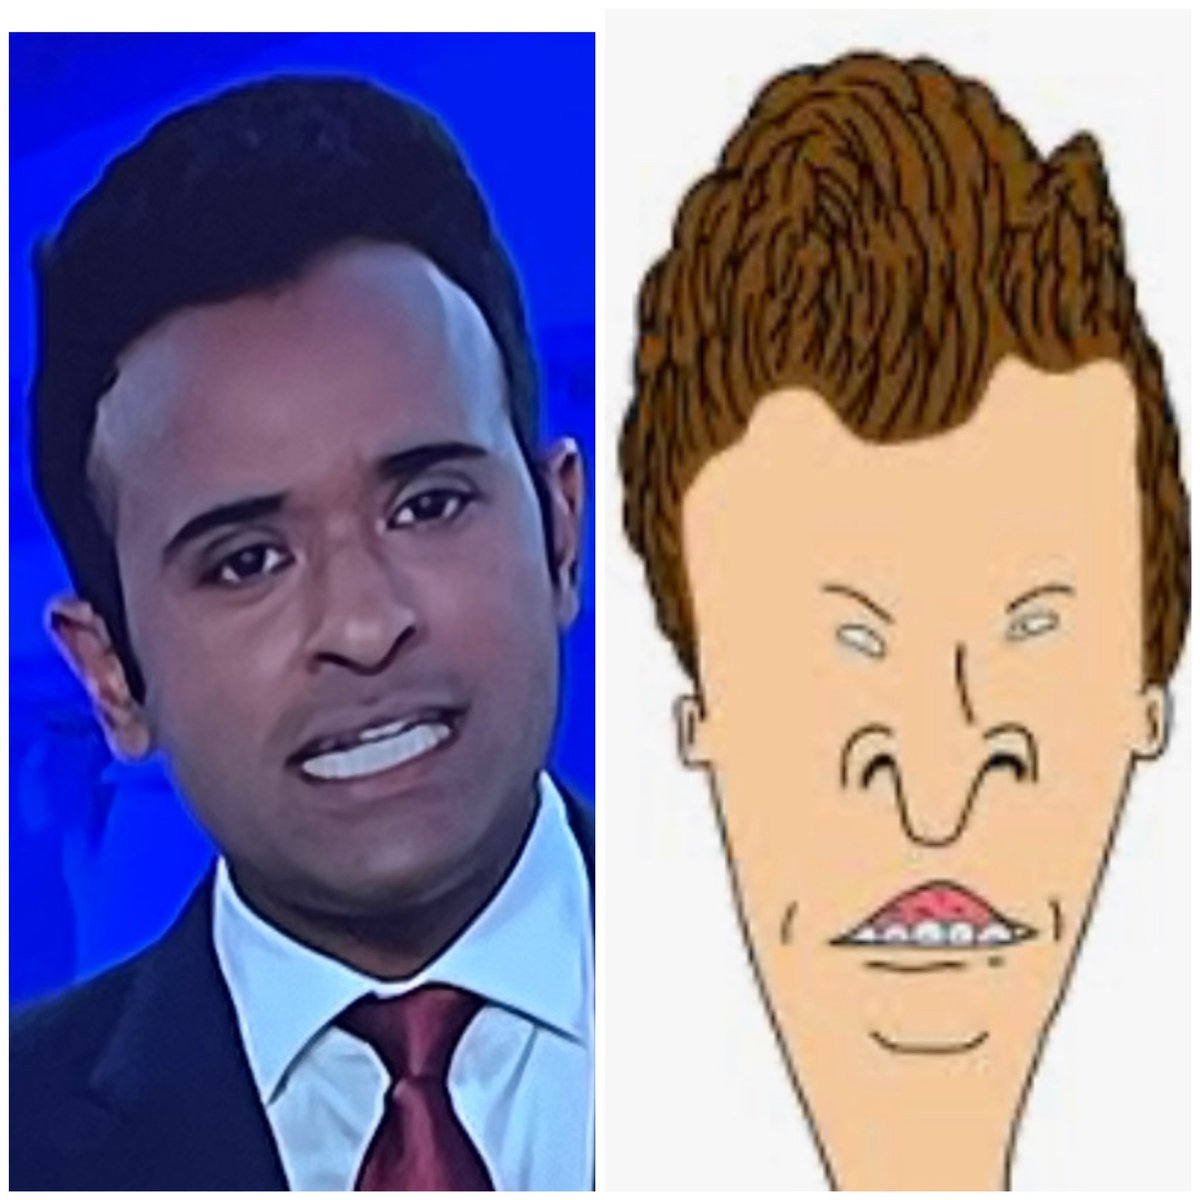 Vivek coming in strong with the Butthead hair cut, #RepublicanDebate #GOPDebate #VivekRamaswamy #bevisandbutthead